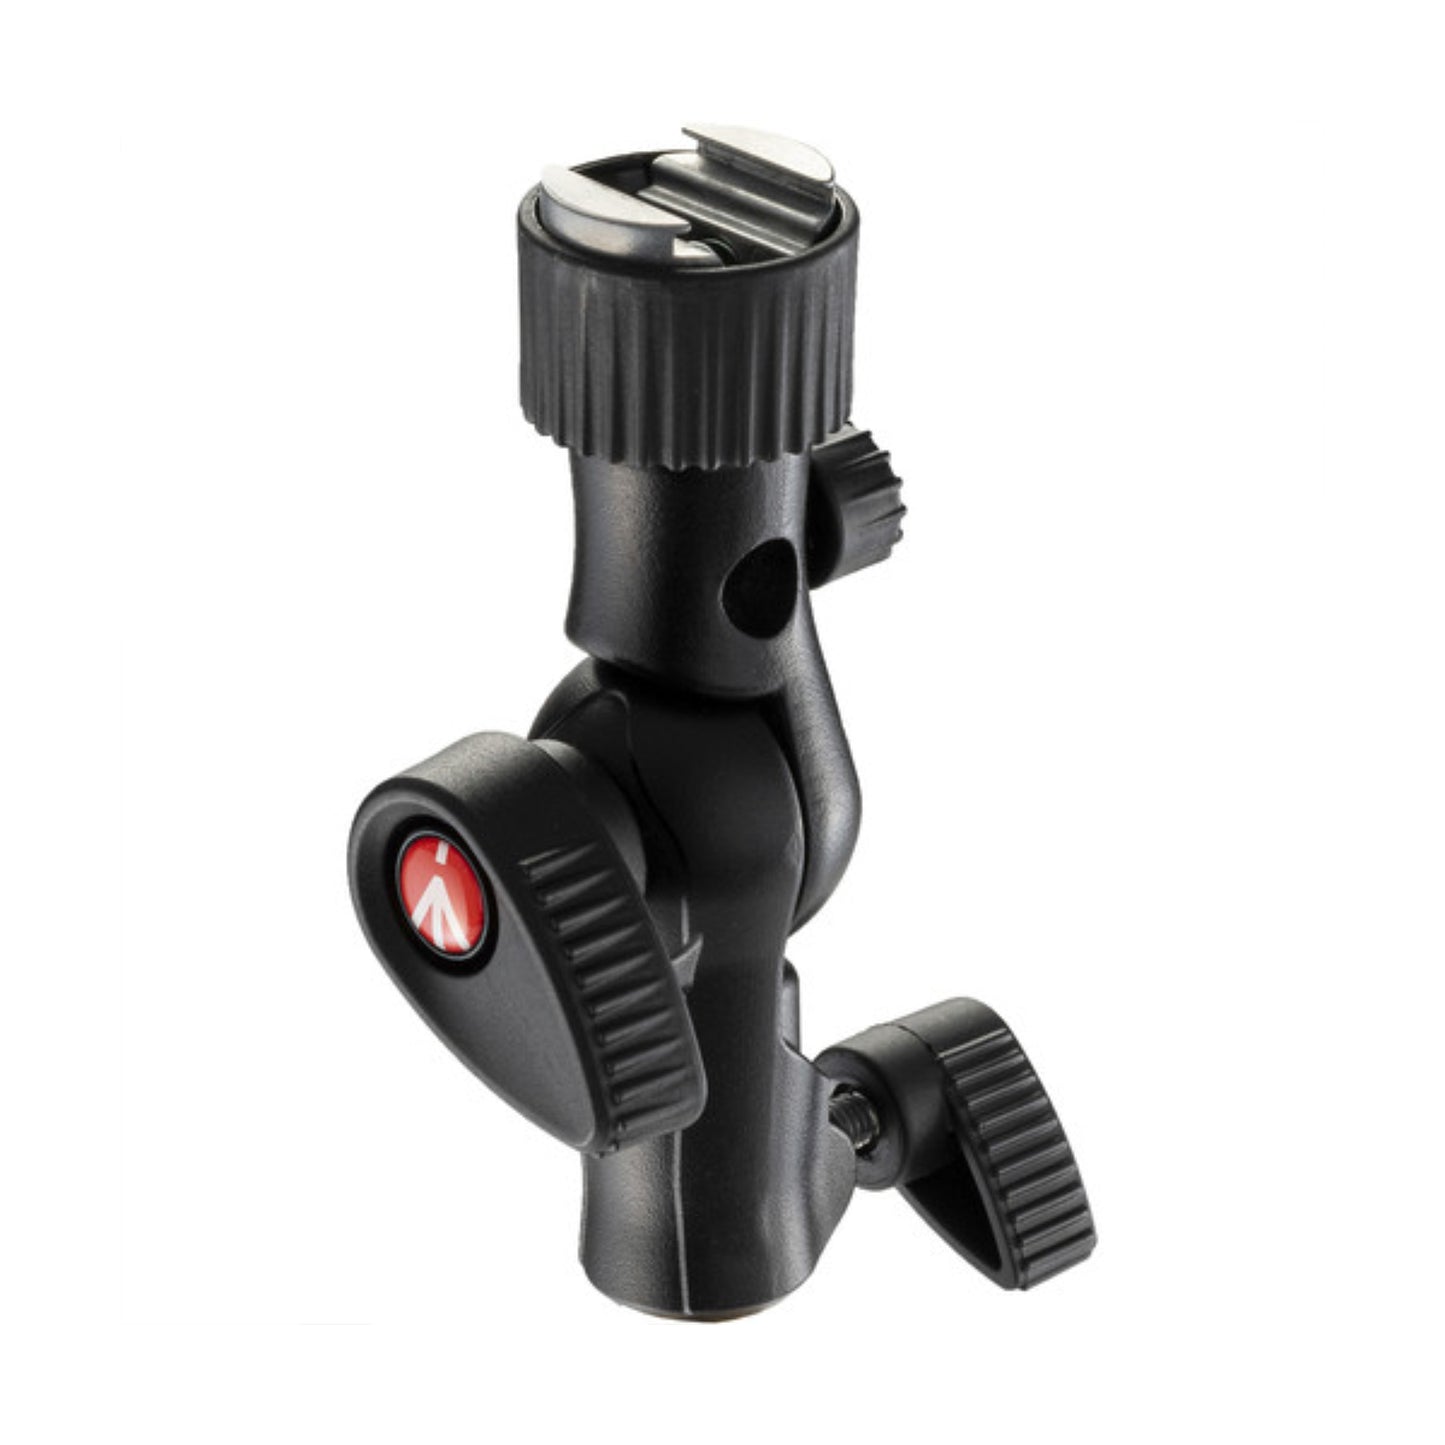 Hire Manfrotto Cold Shoe Tilt Head at Topic Rentals